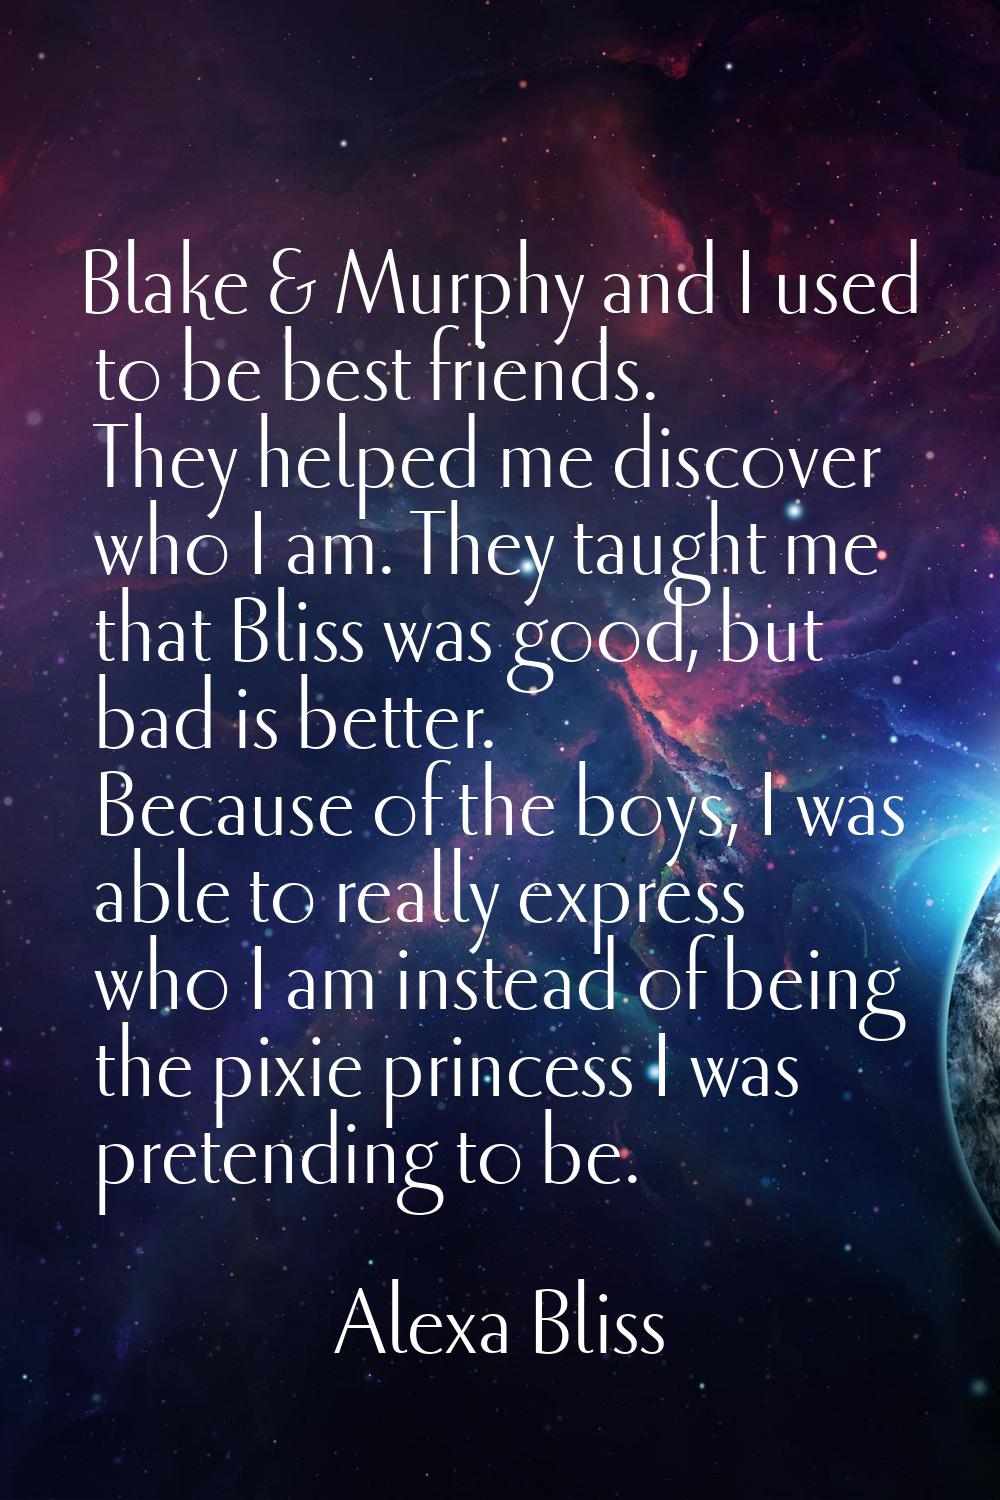 Blake & Murphy and I used to be best friends. They helped me discover who I am. They taught me that